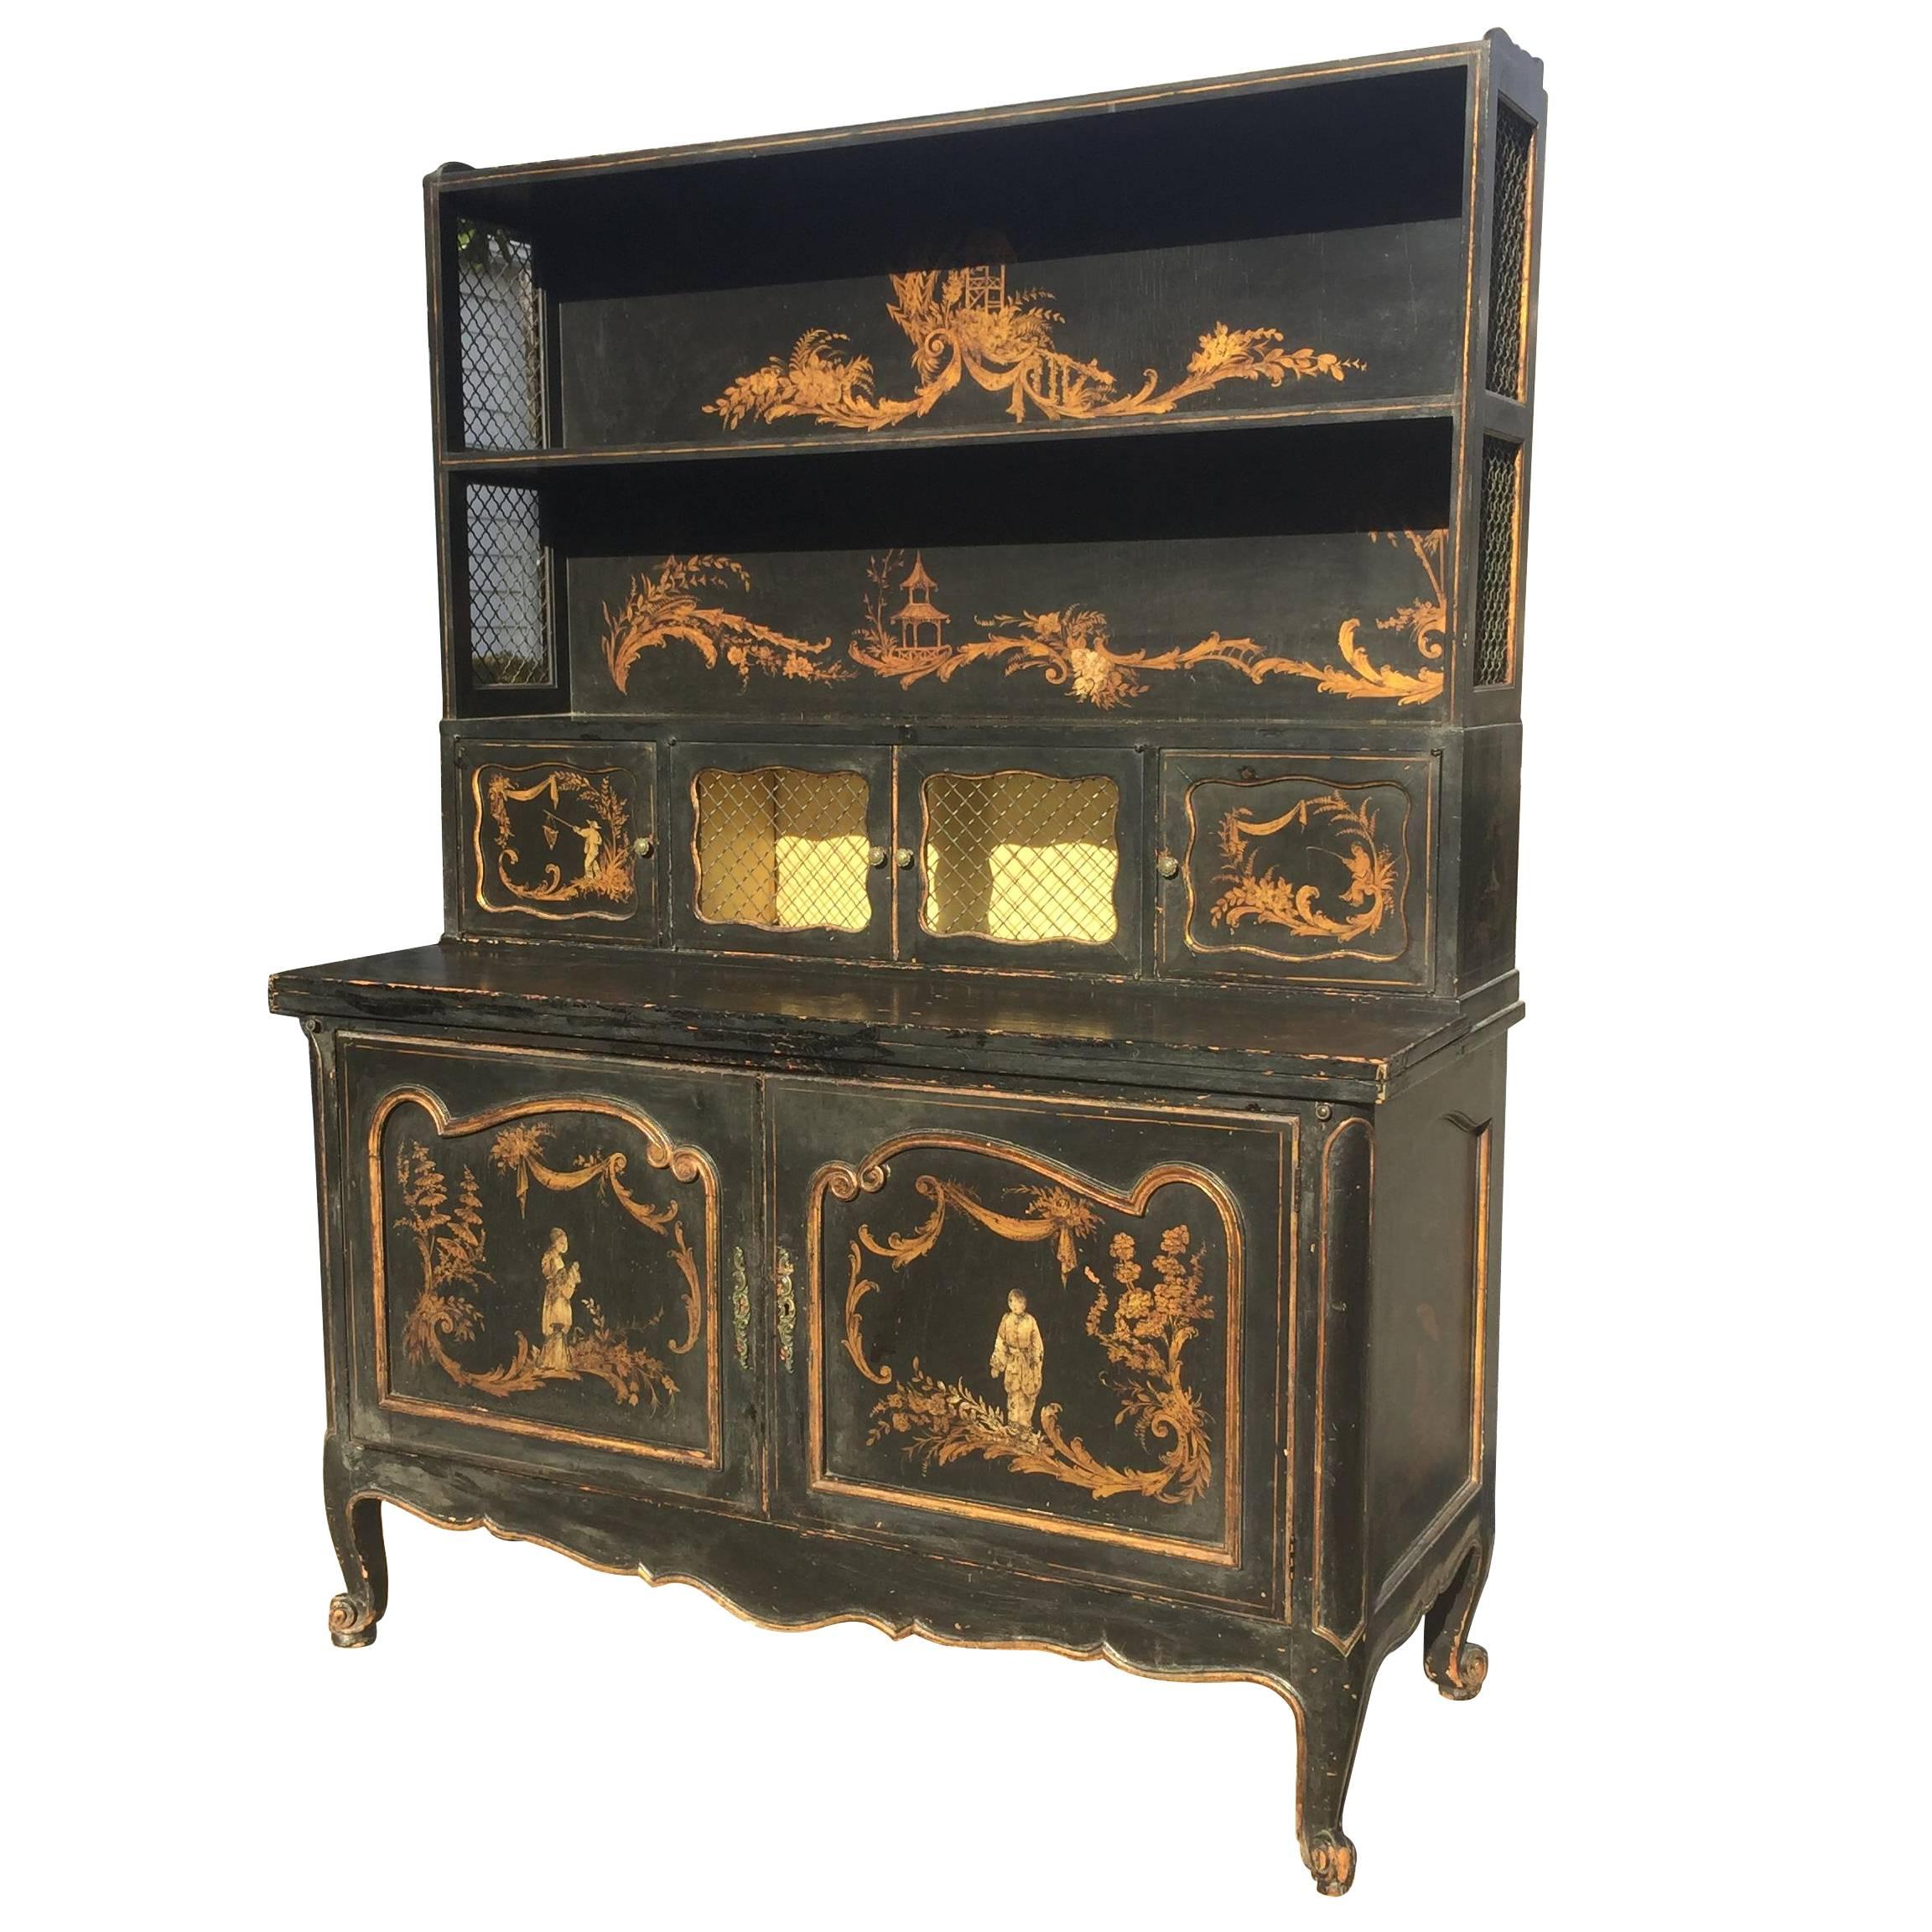 Louis XV French style chinoiserie cabinet- could be utilized as a secretary, bar or bookcase cabinet. Black painted frame with gold painted detail, folding green lacquer top.
 